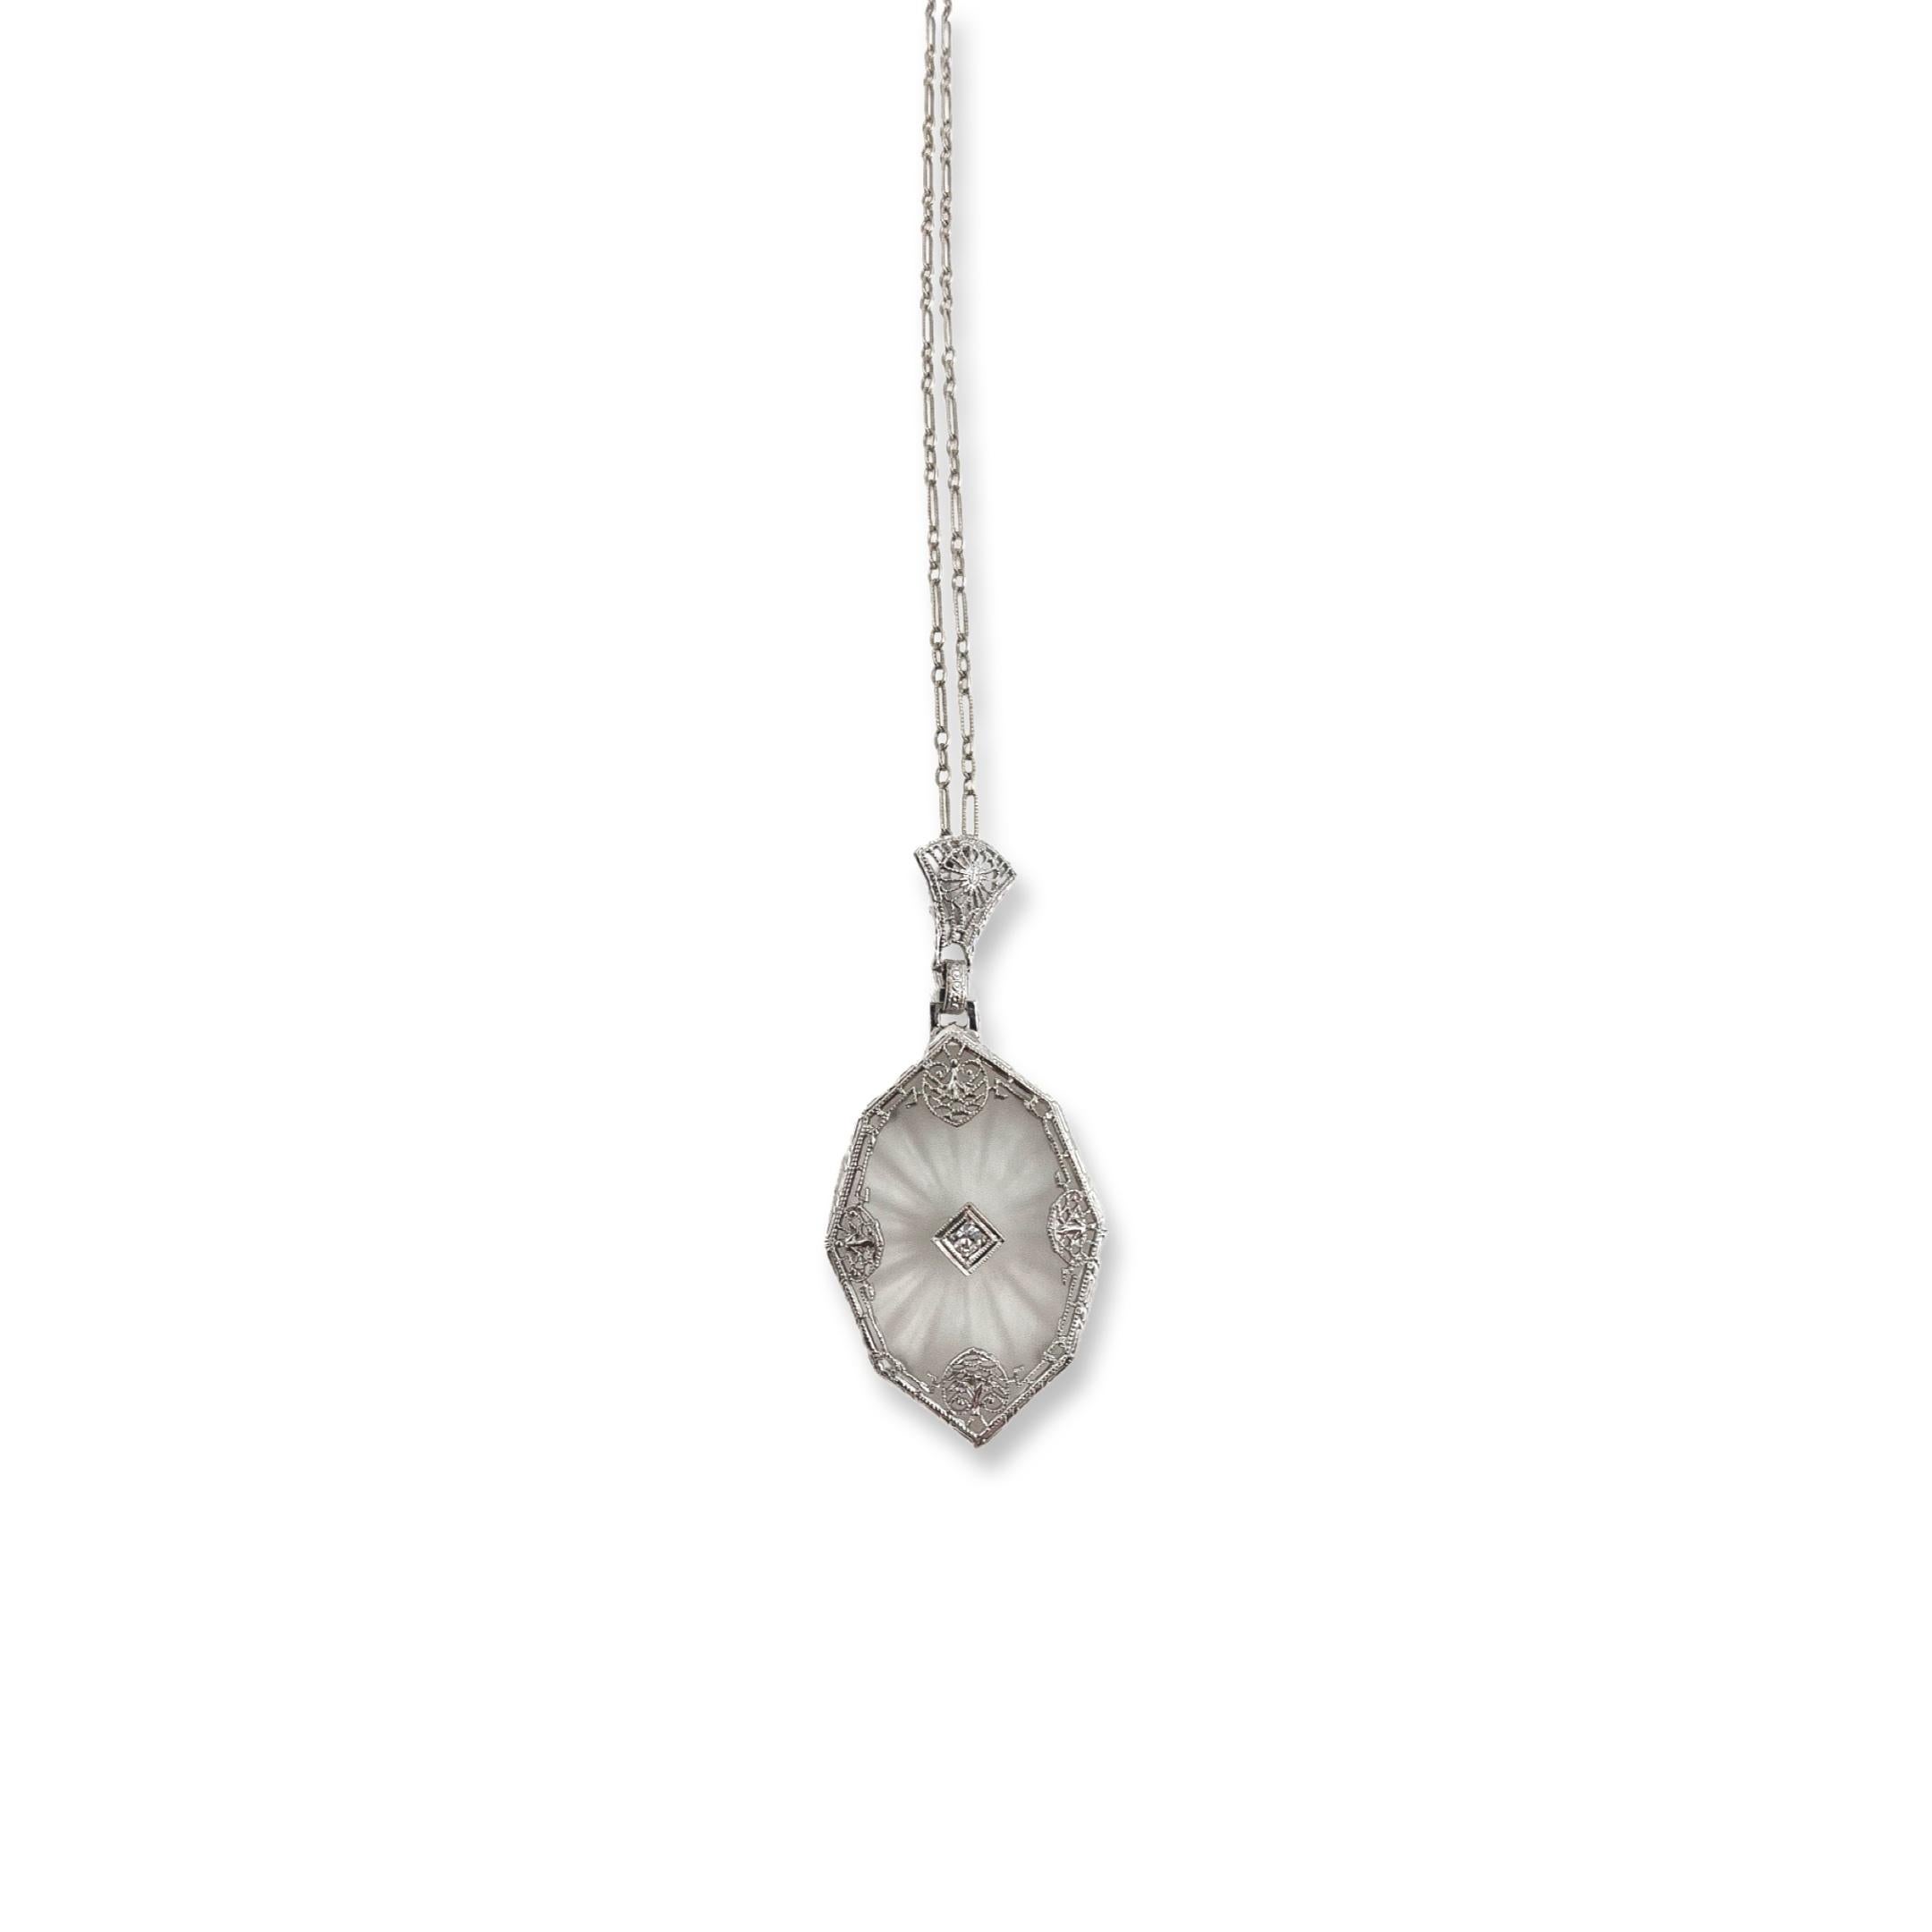 This beautiful antique piece was handcrafted sometime during the Art Deco design period (1920-1940). The pendant is Depression Era and crafted from 10K white gold. The chain is modern made and is 14K white gold. The pendant features a large camphor